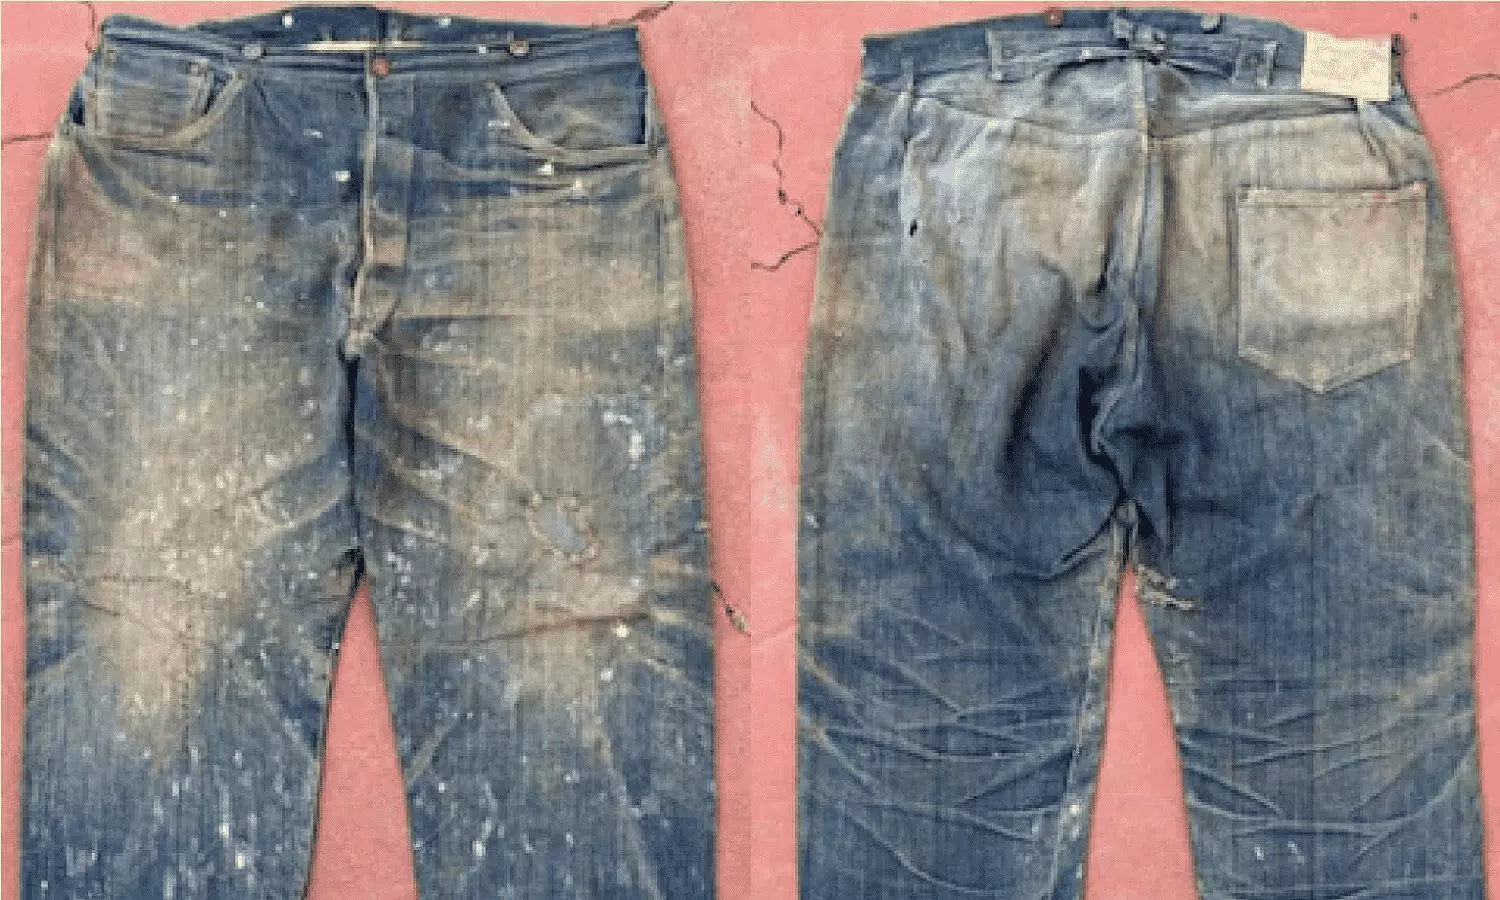 Oldest jeans found in goldmine